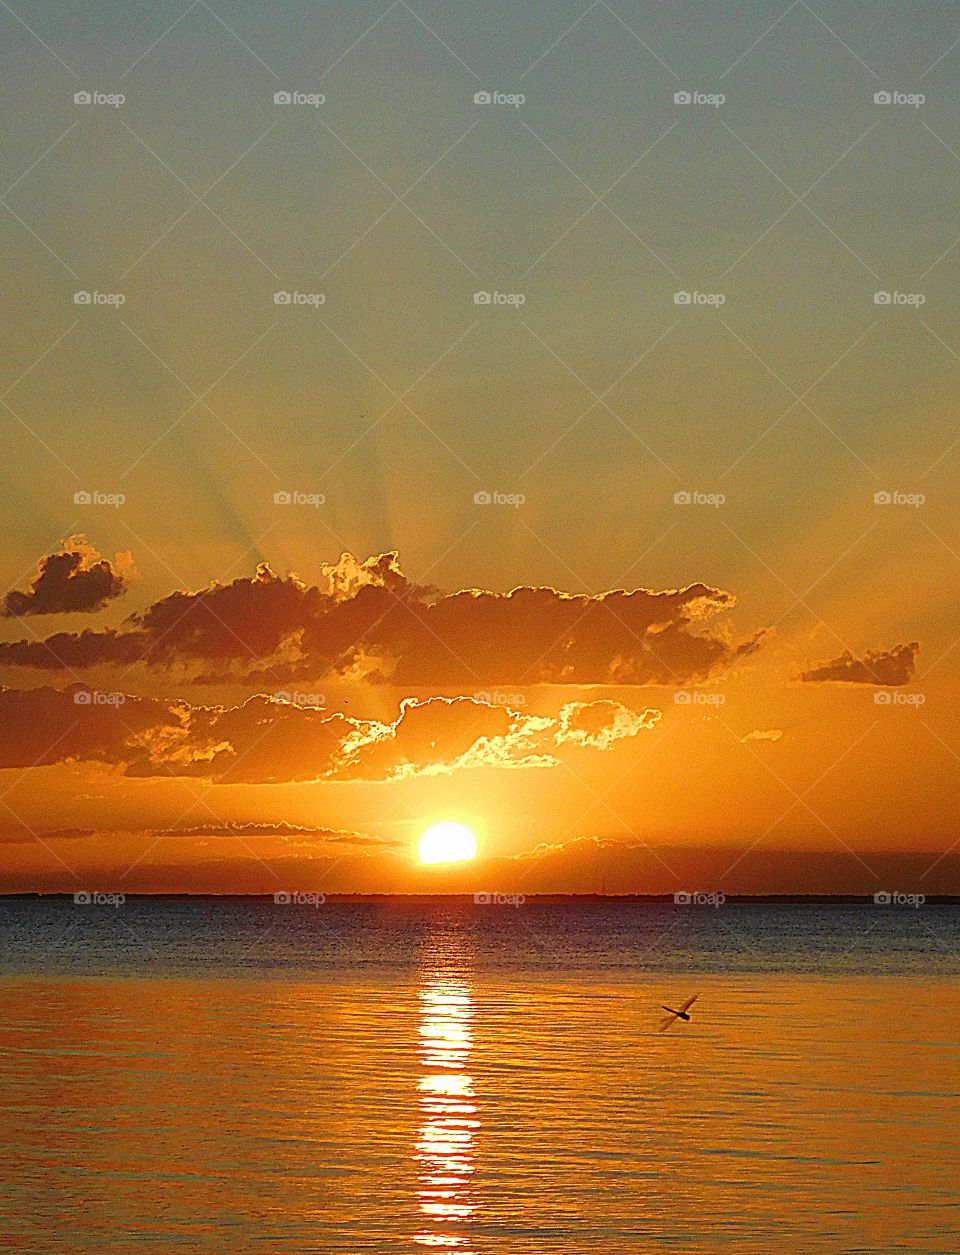 Spray of Rays- a descending sunset projects its sun rays outward into the clouds and the shimmering surface of the bay